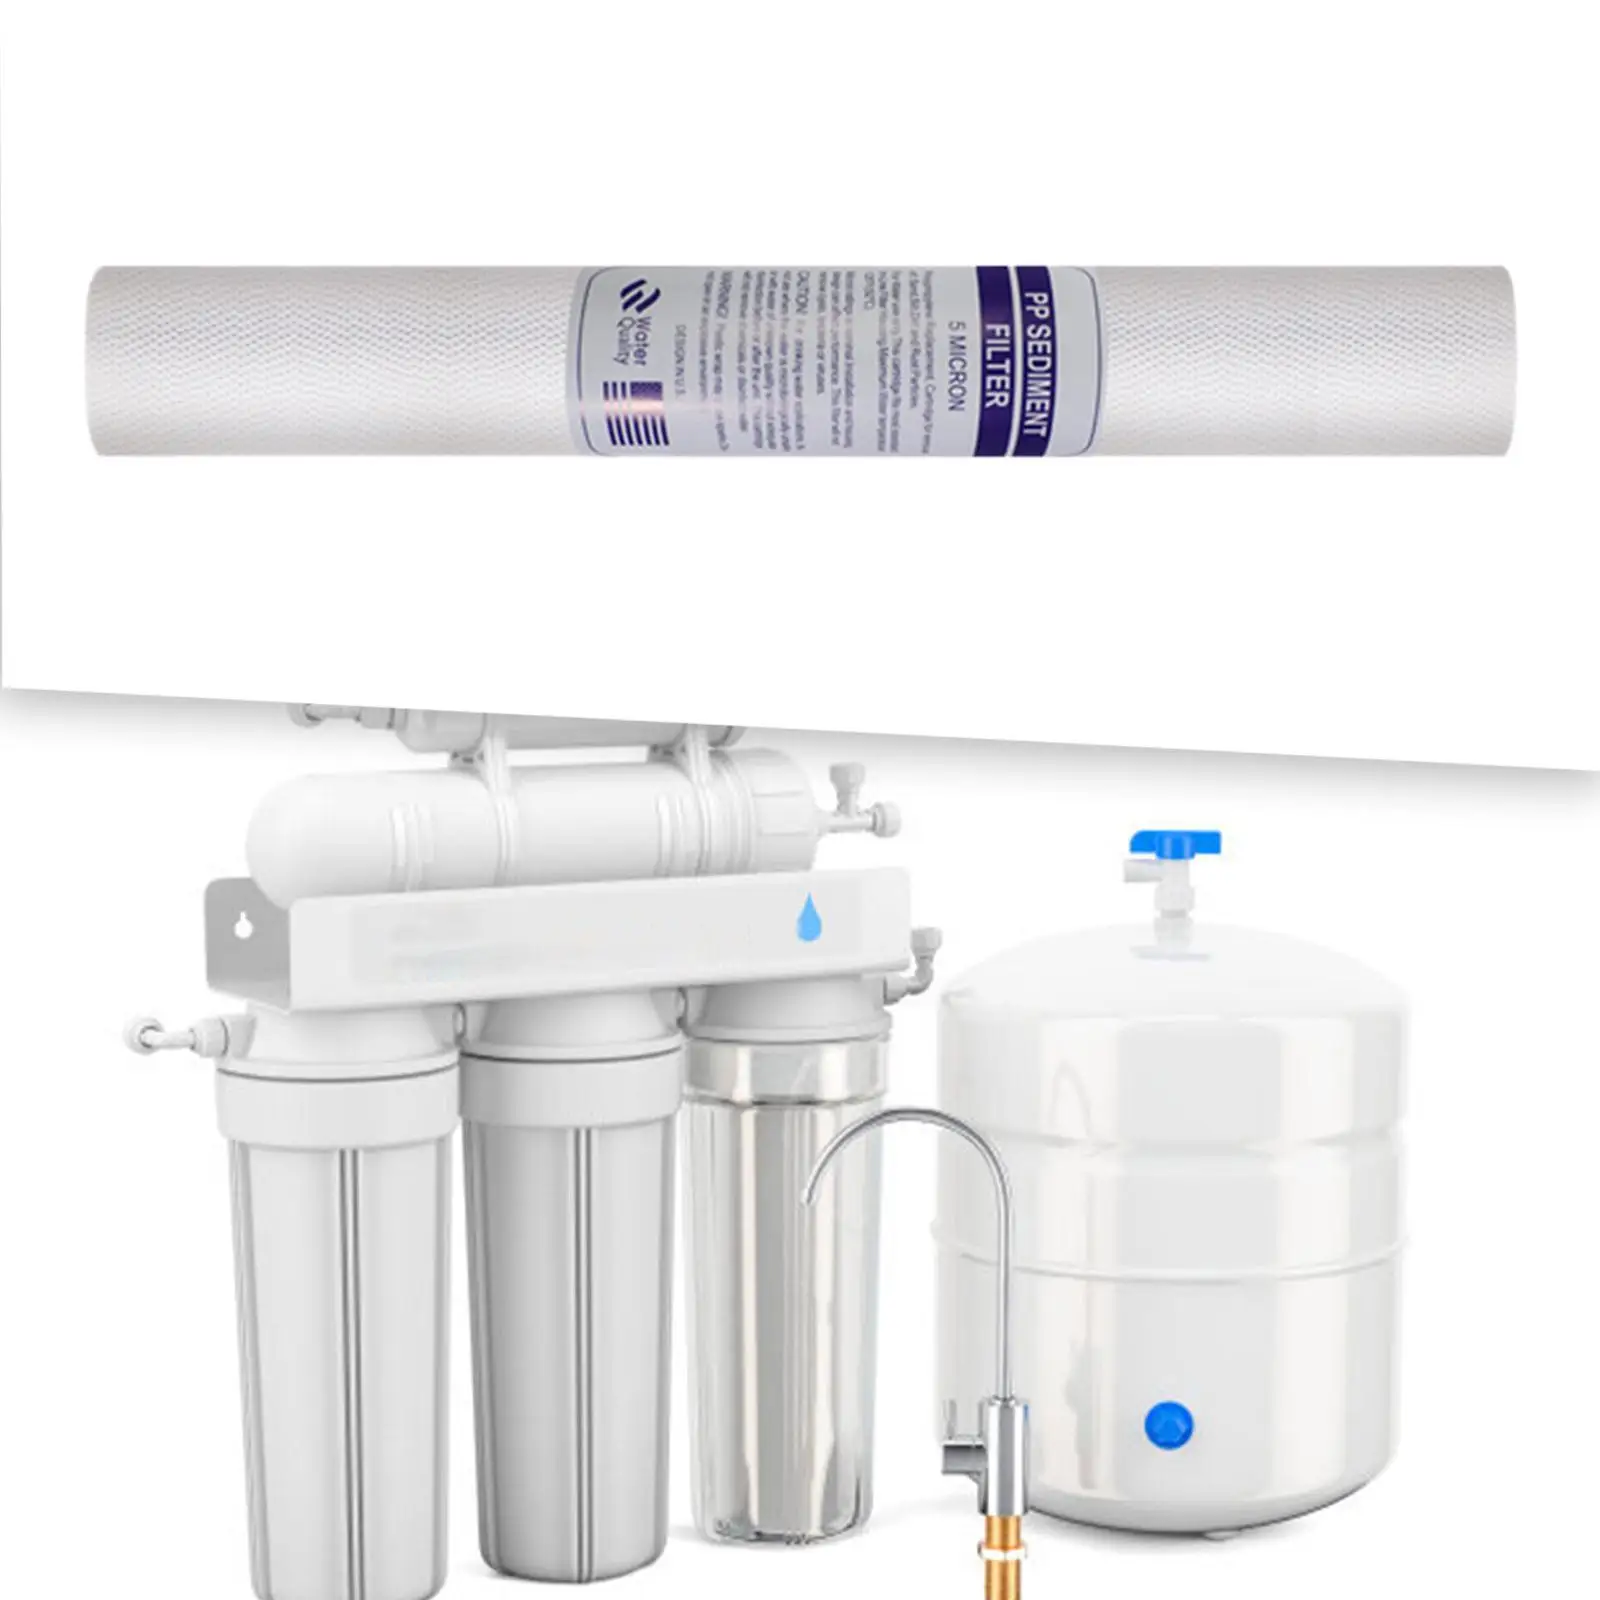 3x Whole House Sediment Filtration Sediment Filter Easy to Install Durable